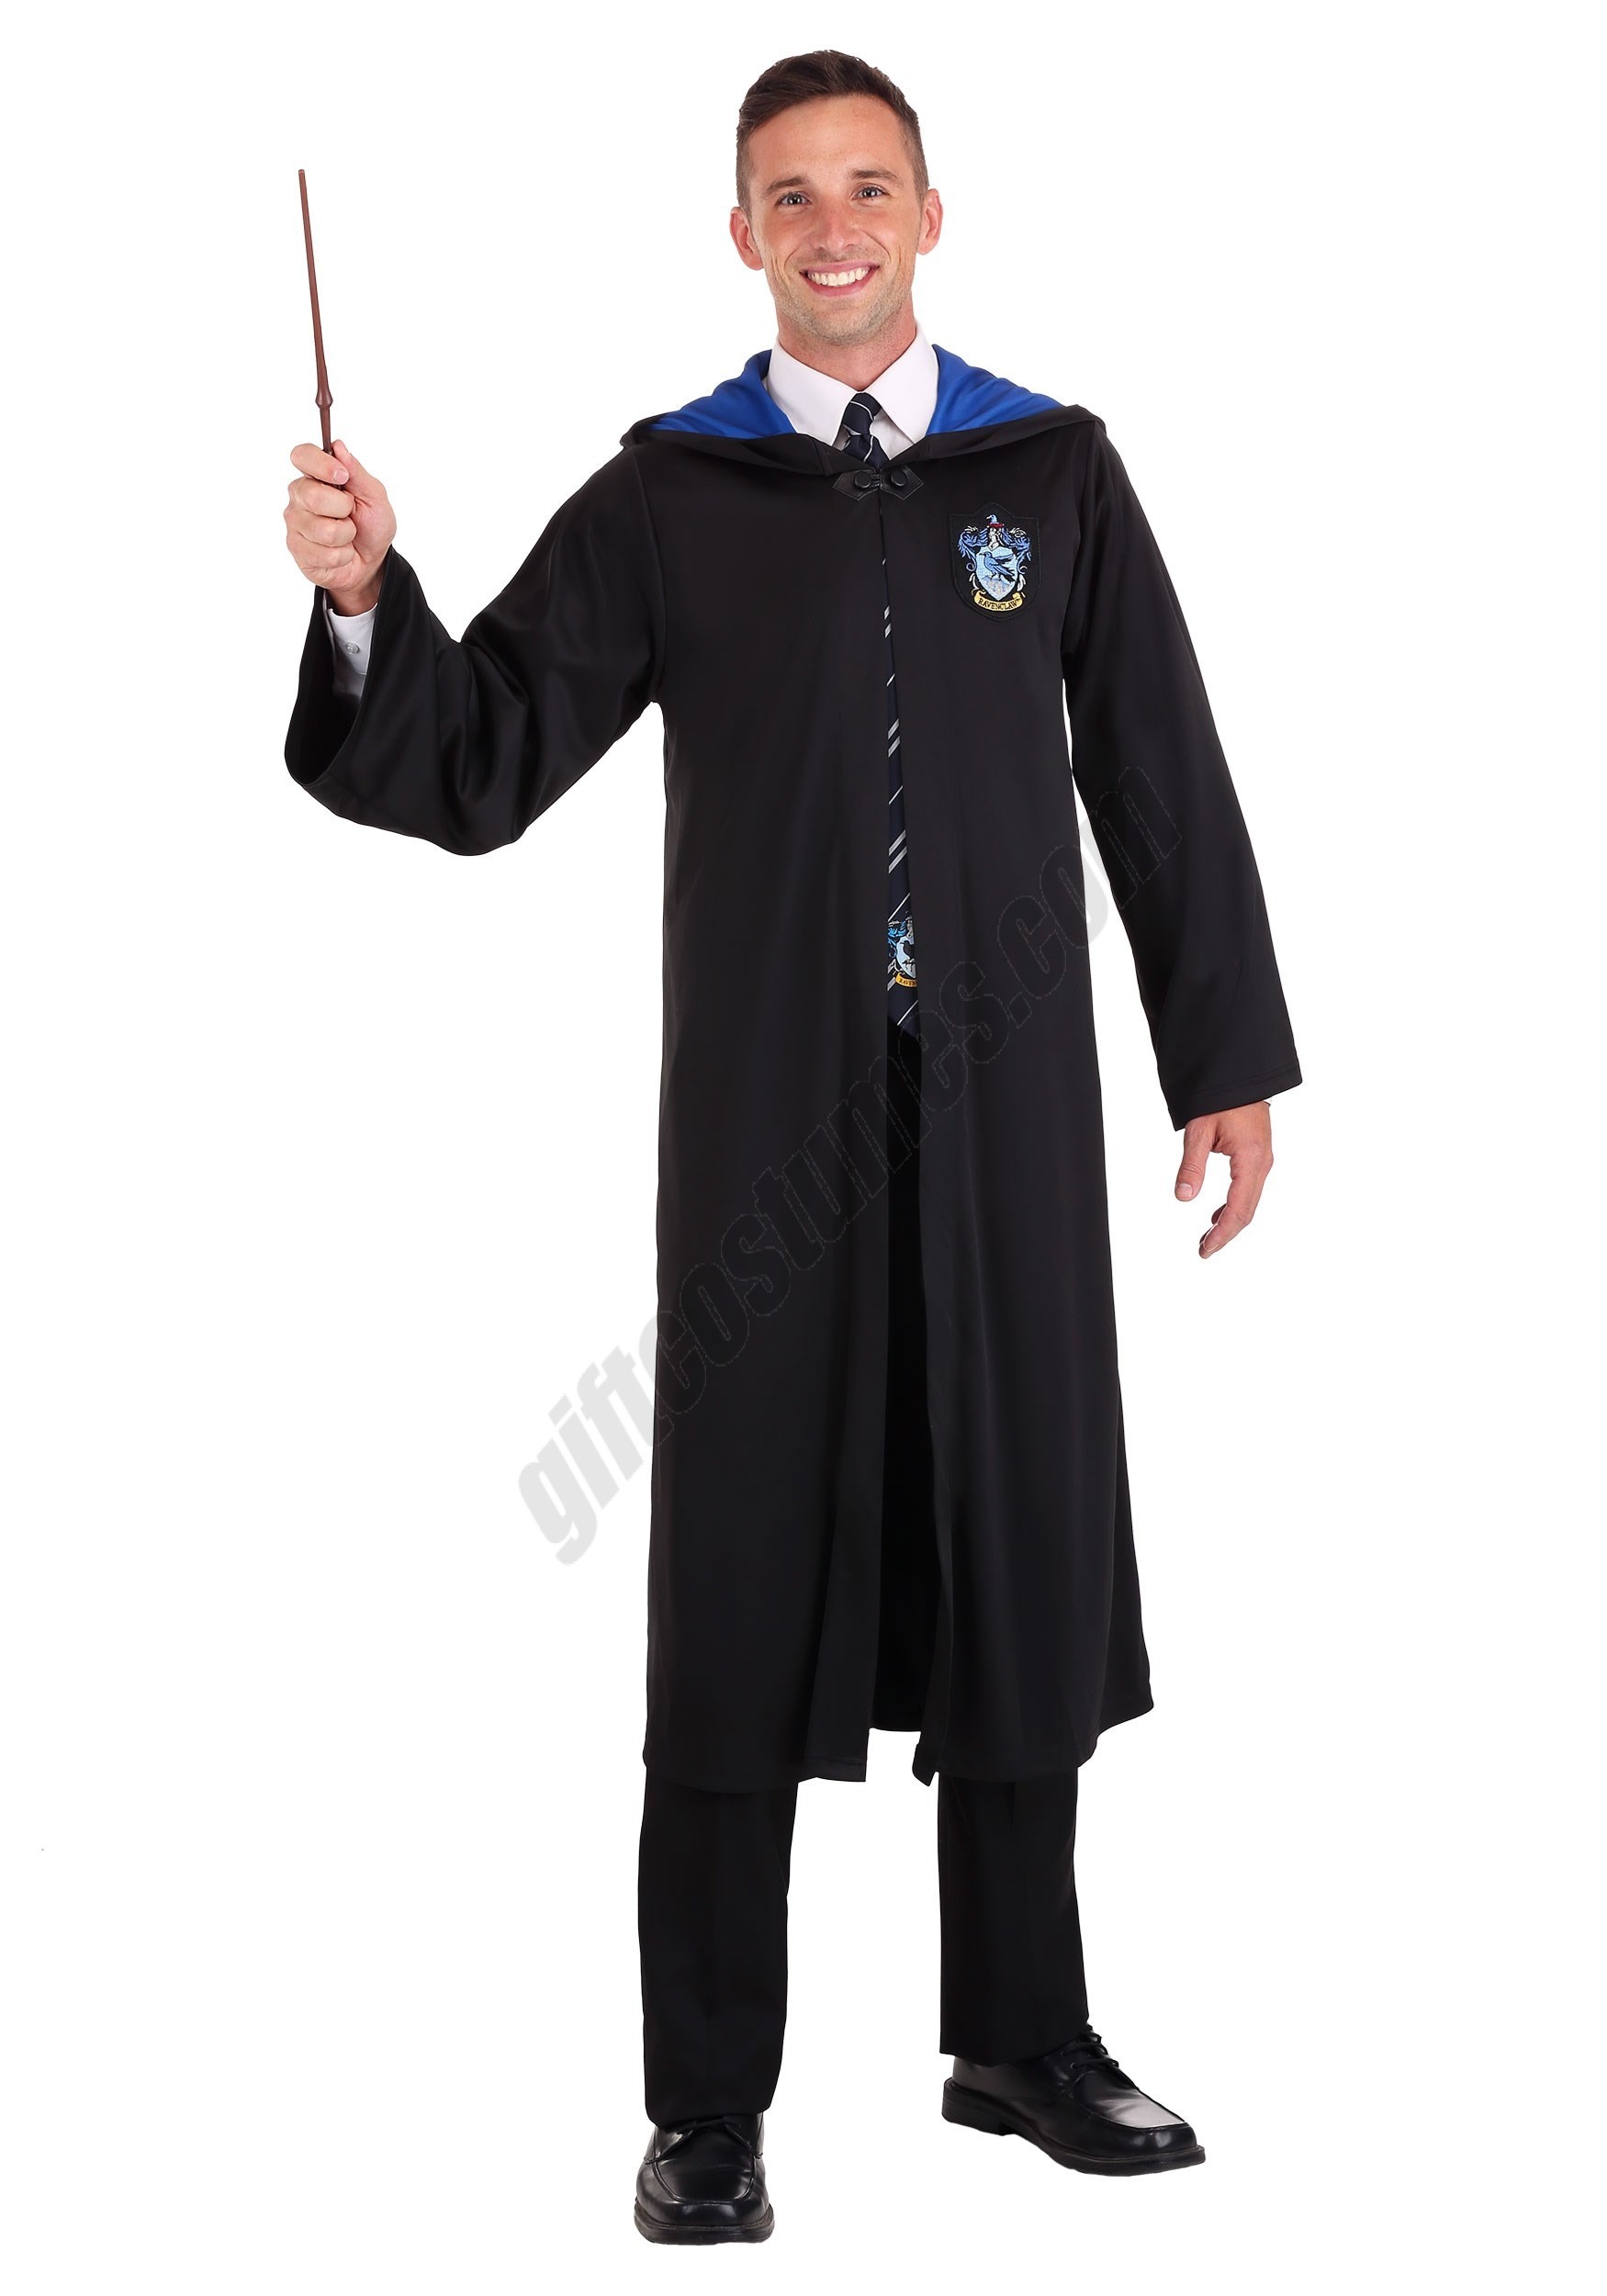 Adult Harry Potter Ravenclaw Robe Costume Promotions - Adult Harry Potter Ravenclaw Robe Costume Promotions